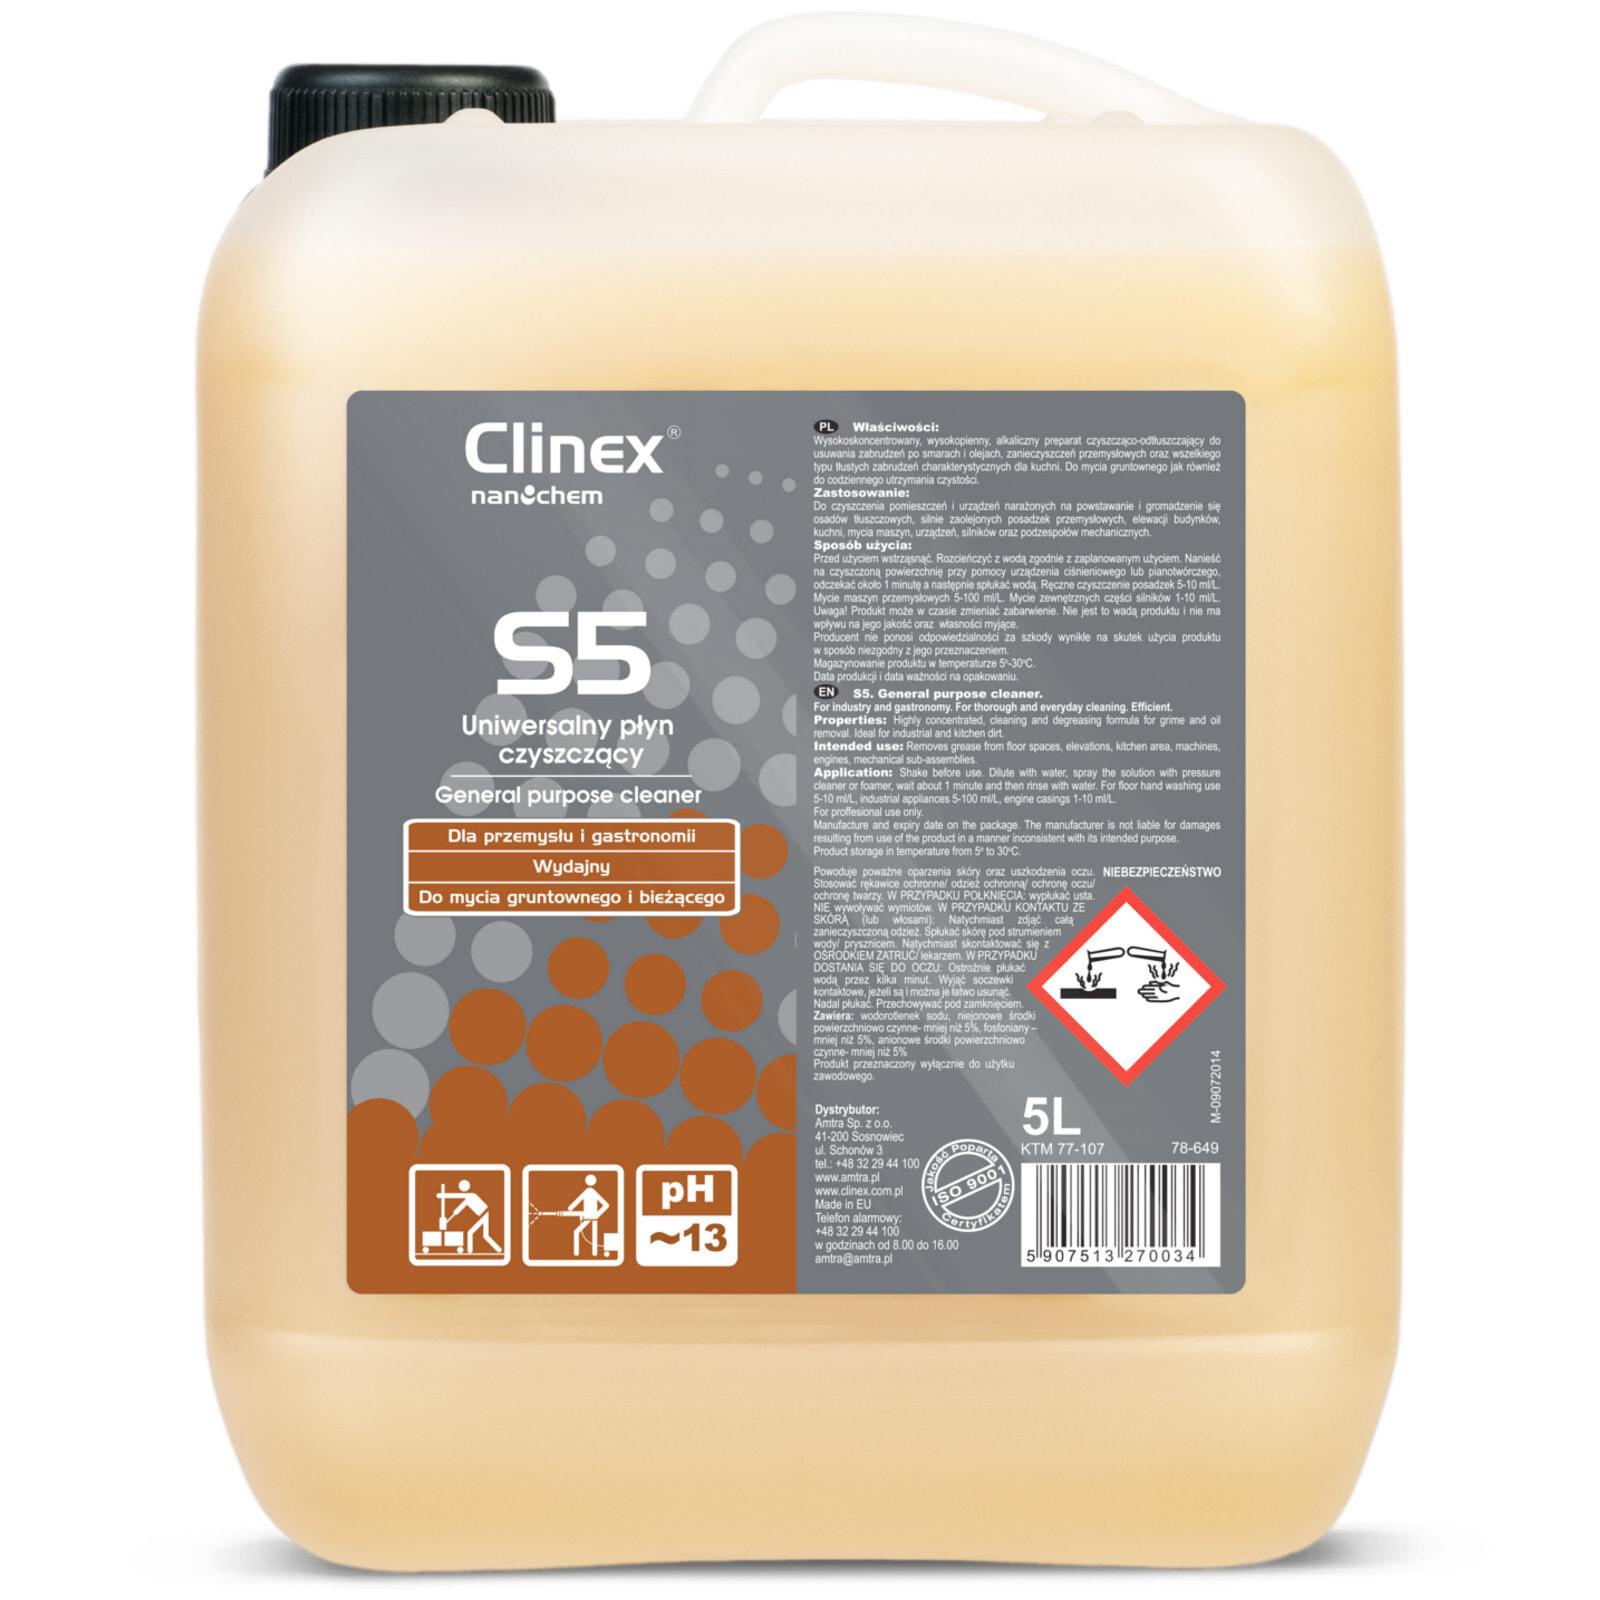 Universal cleaning fluid for stubborn dirt CLINEX S5 5L